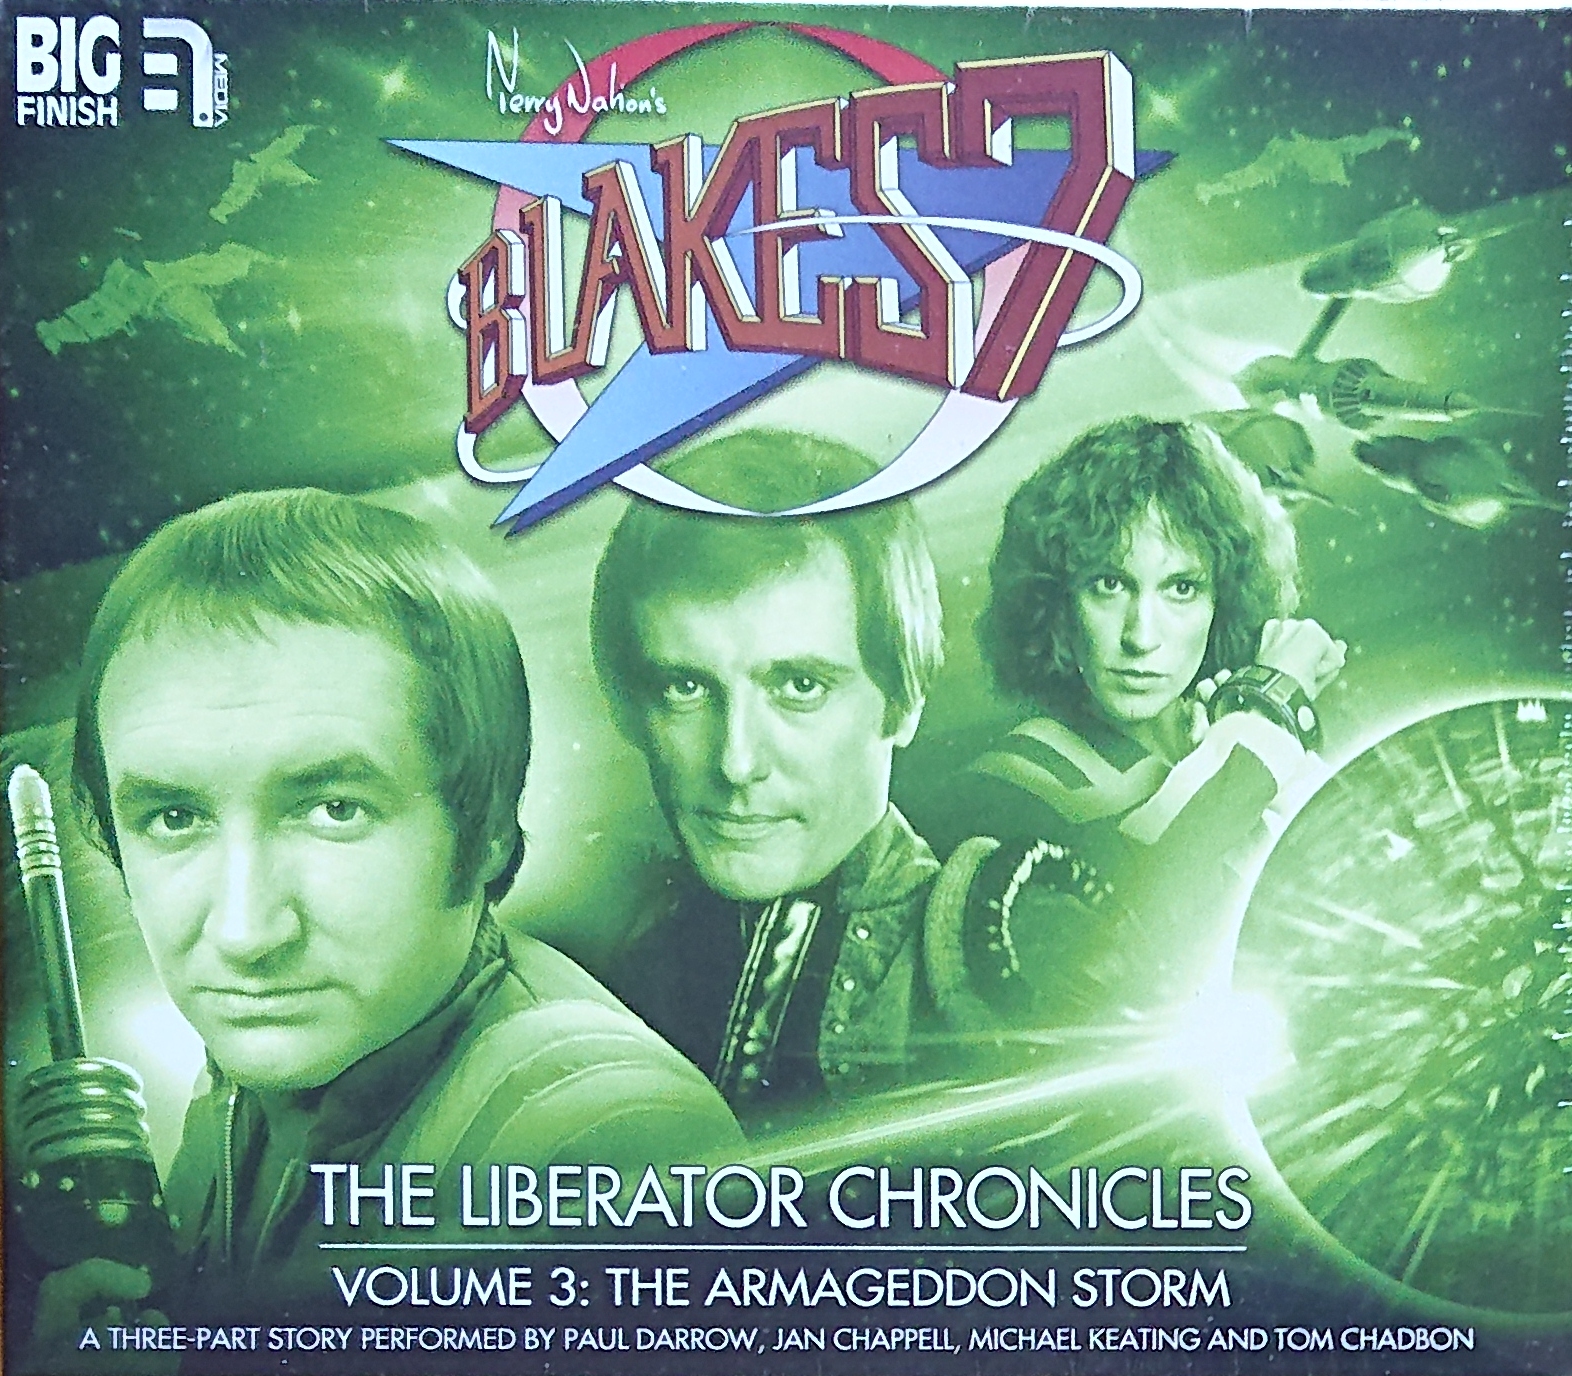 Picture of The Liberator chronicles - Volume 3 by artist Unknown from the BBC cds - Records and Tapes library